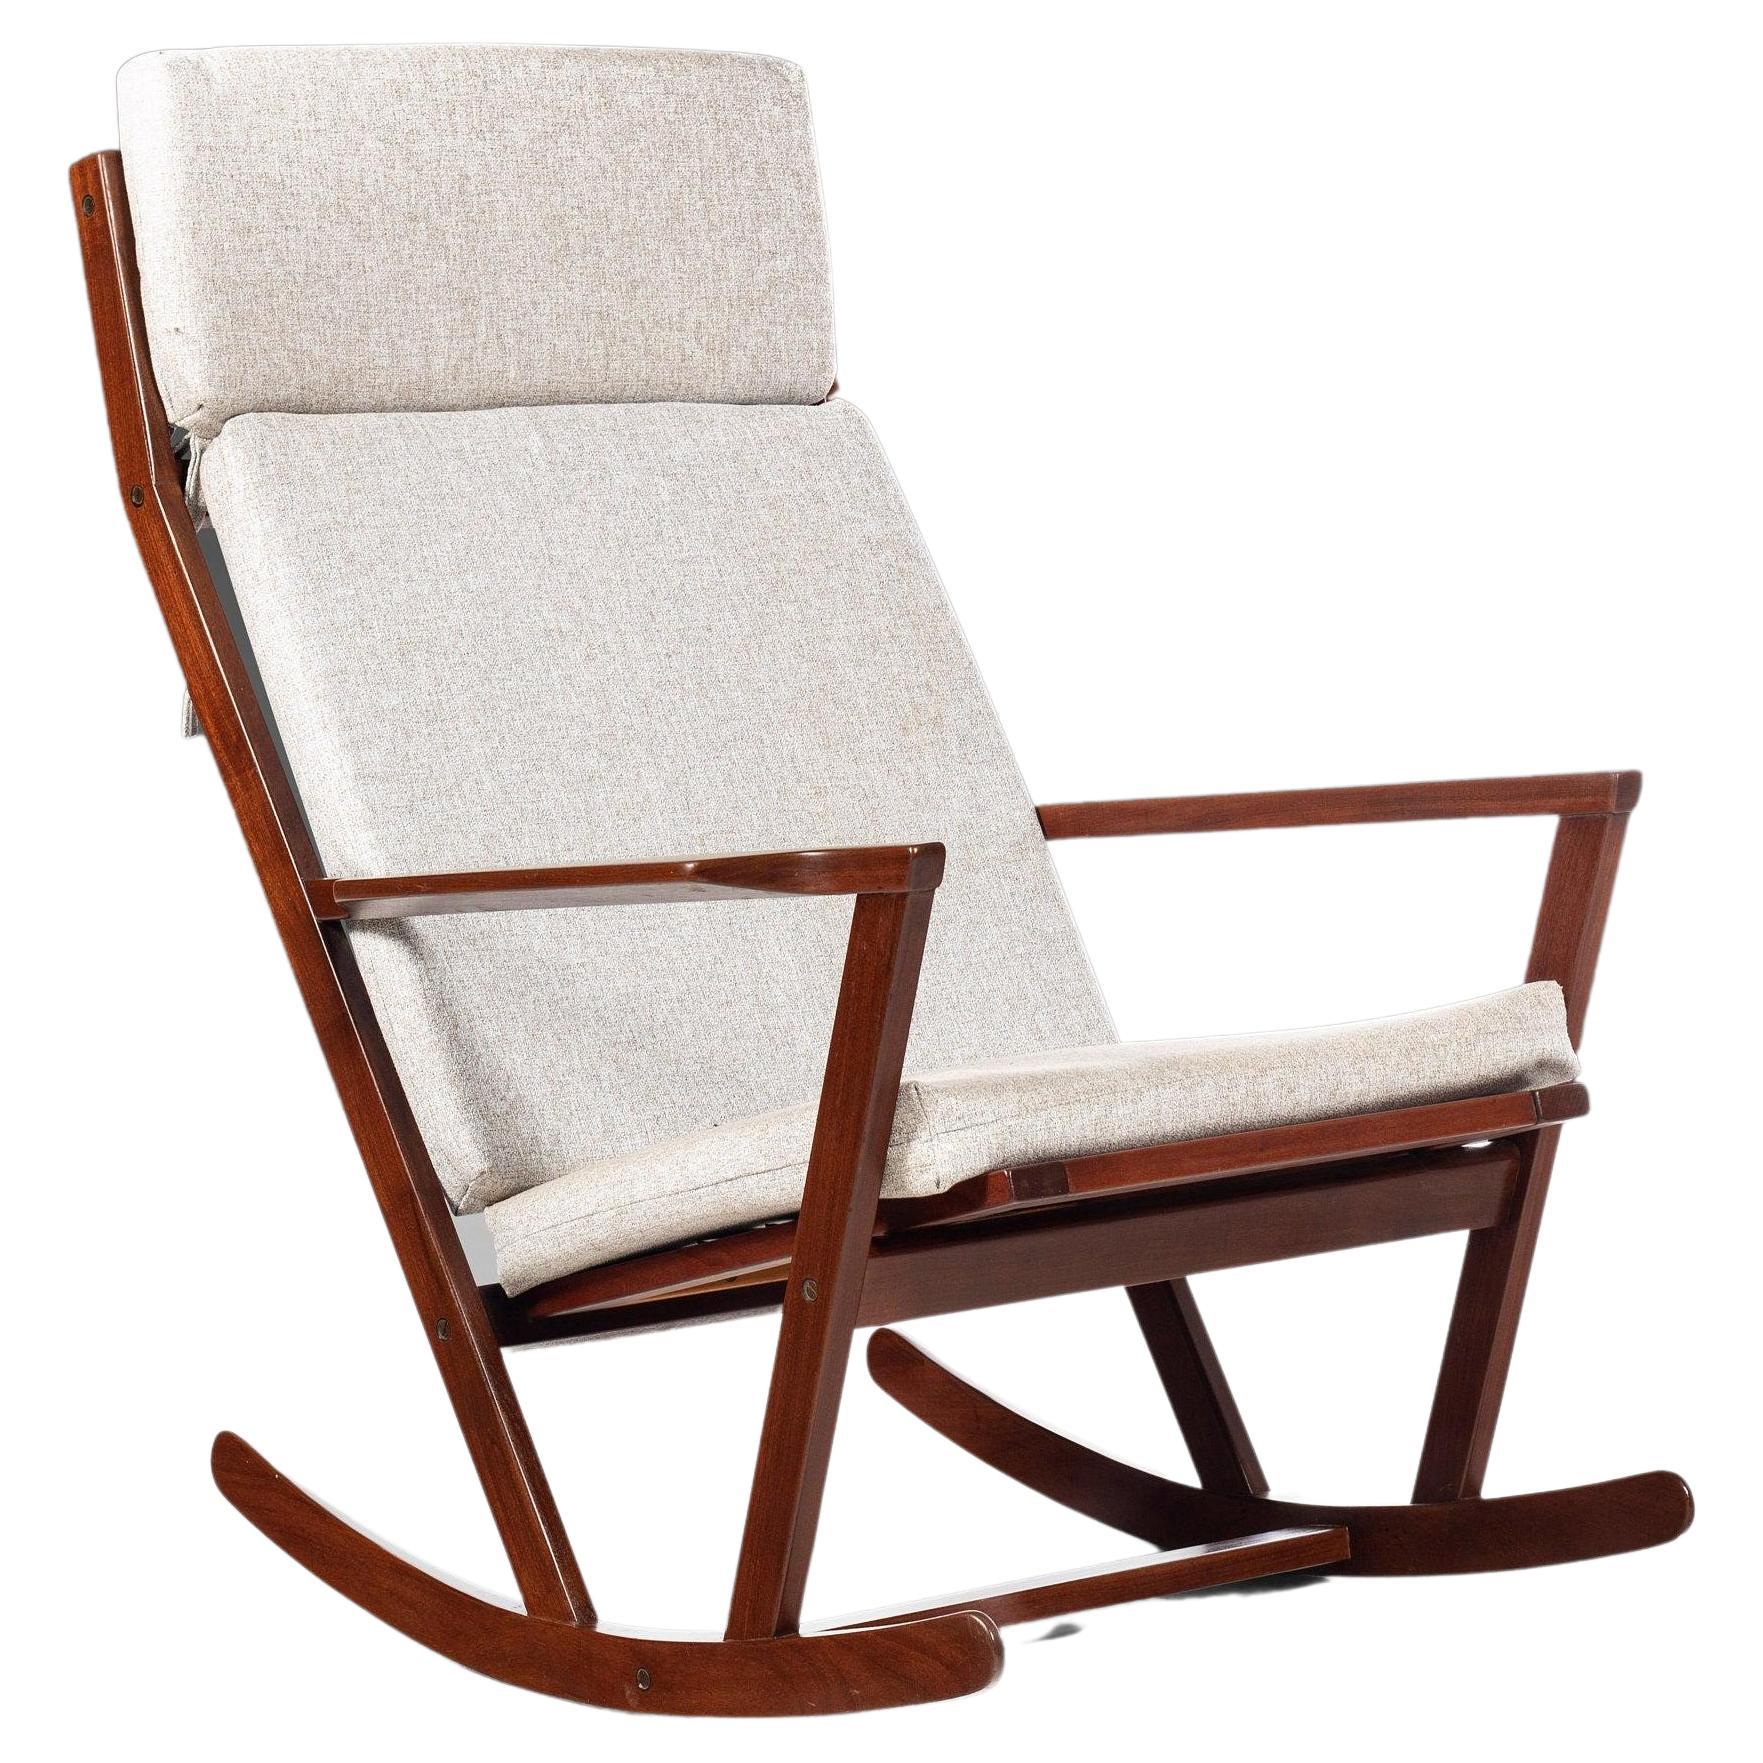 Rocking Chair by Poul Volther for Frem Rojle in Afromosia, New Fabric, c. 1960s For Sale